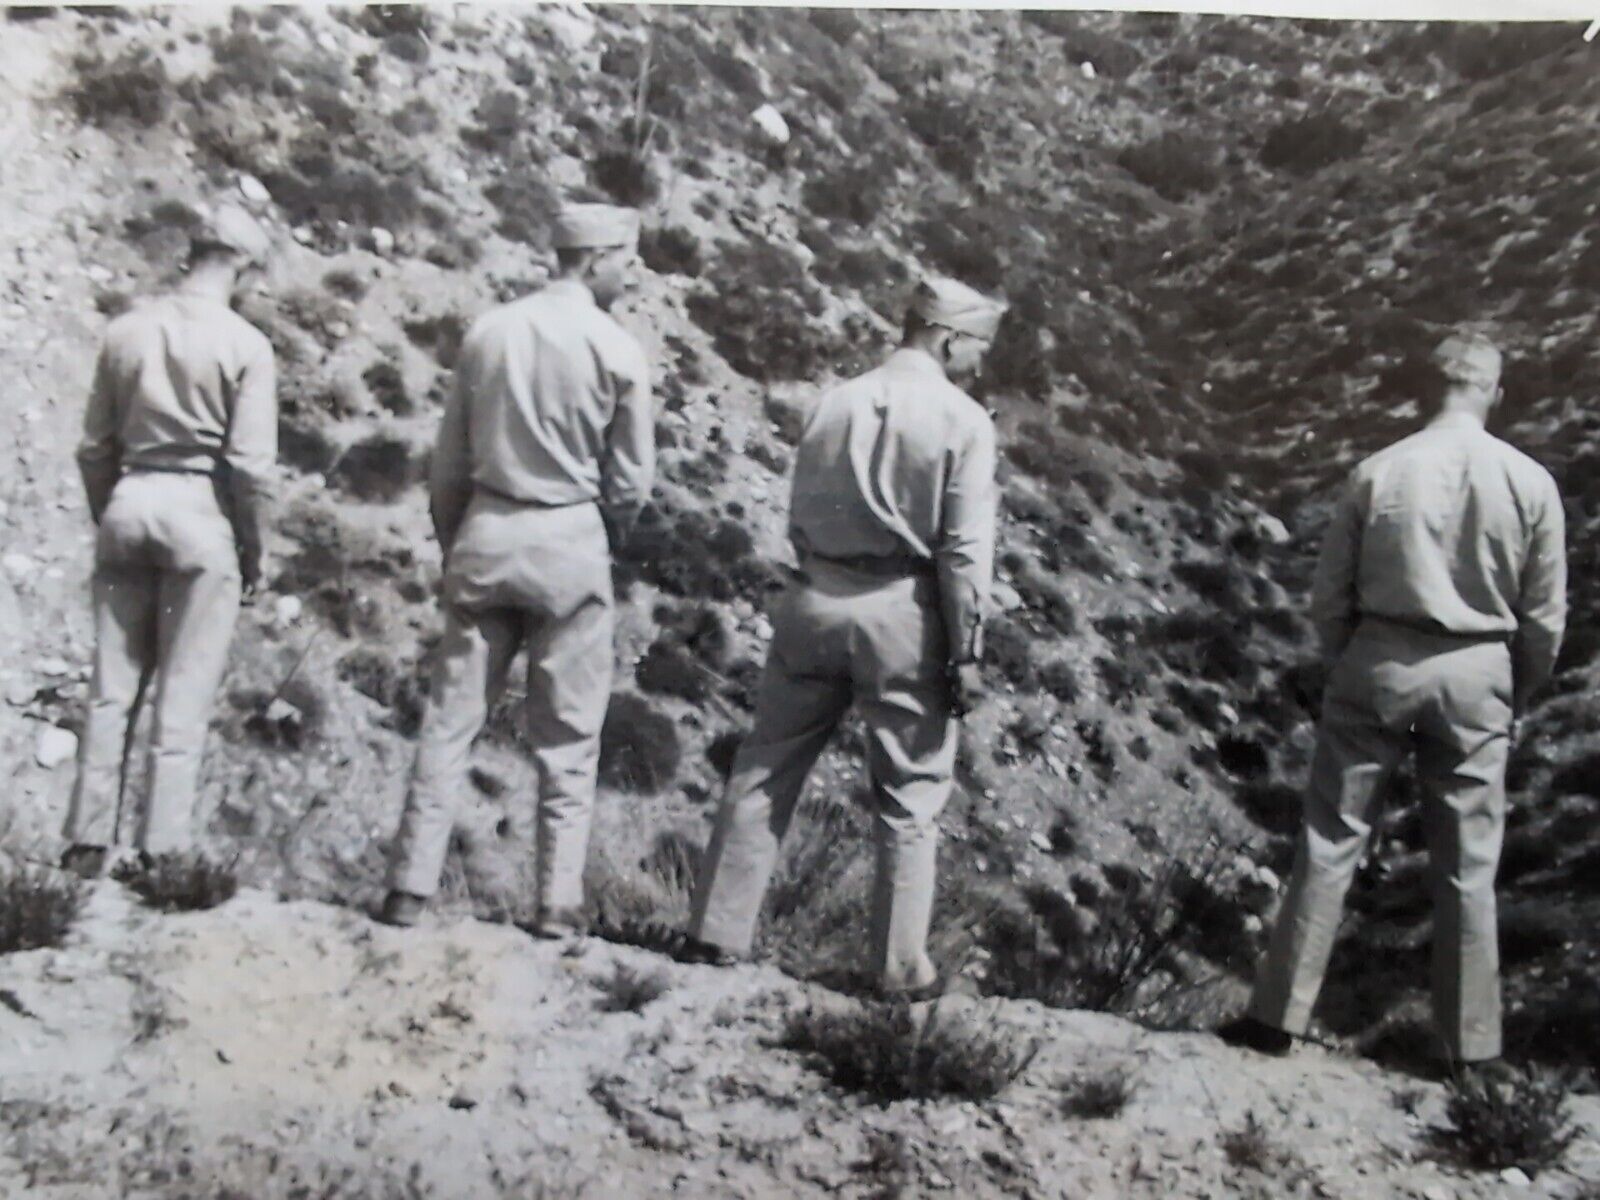 Vintage 1944 Soldiers Urinating 1940s Photo Men Peeing Outside Army Gay Interest